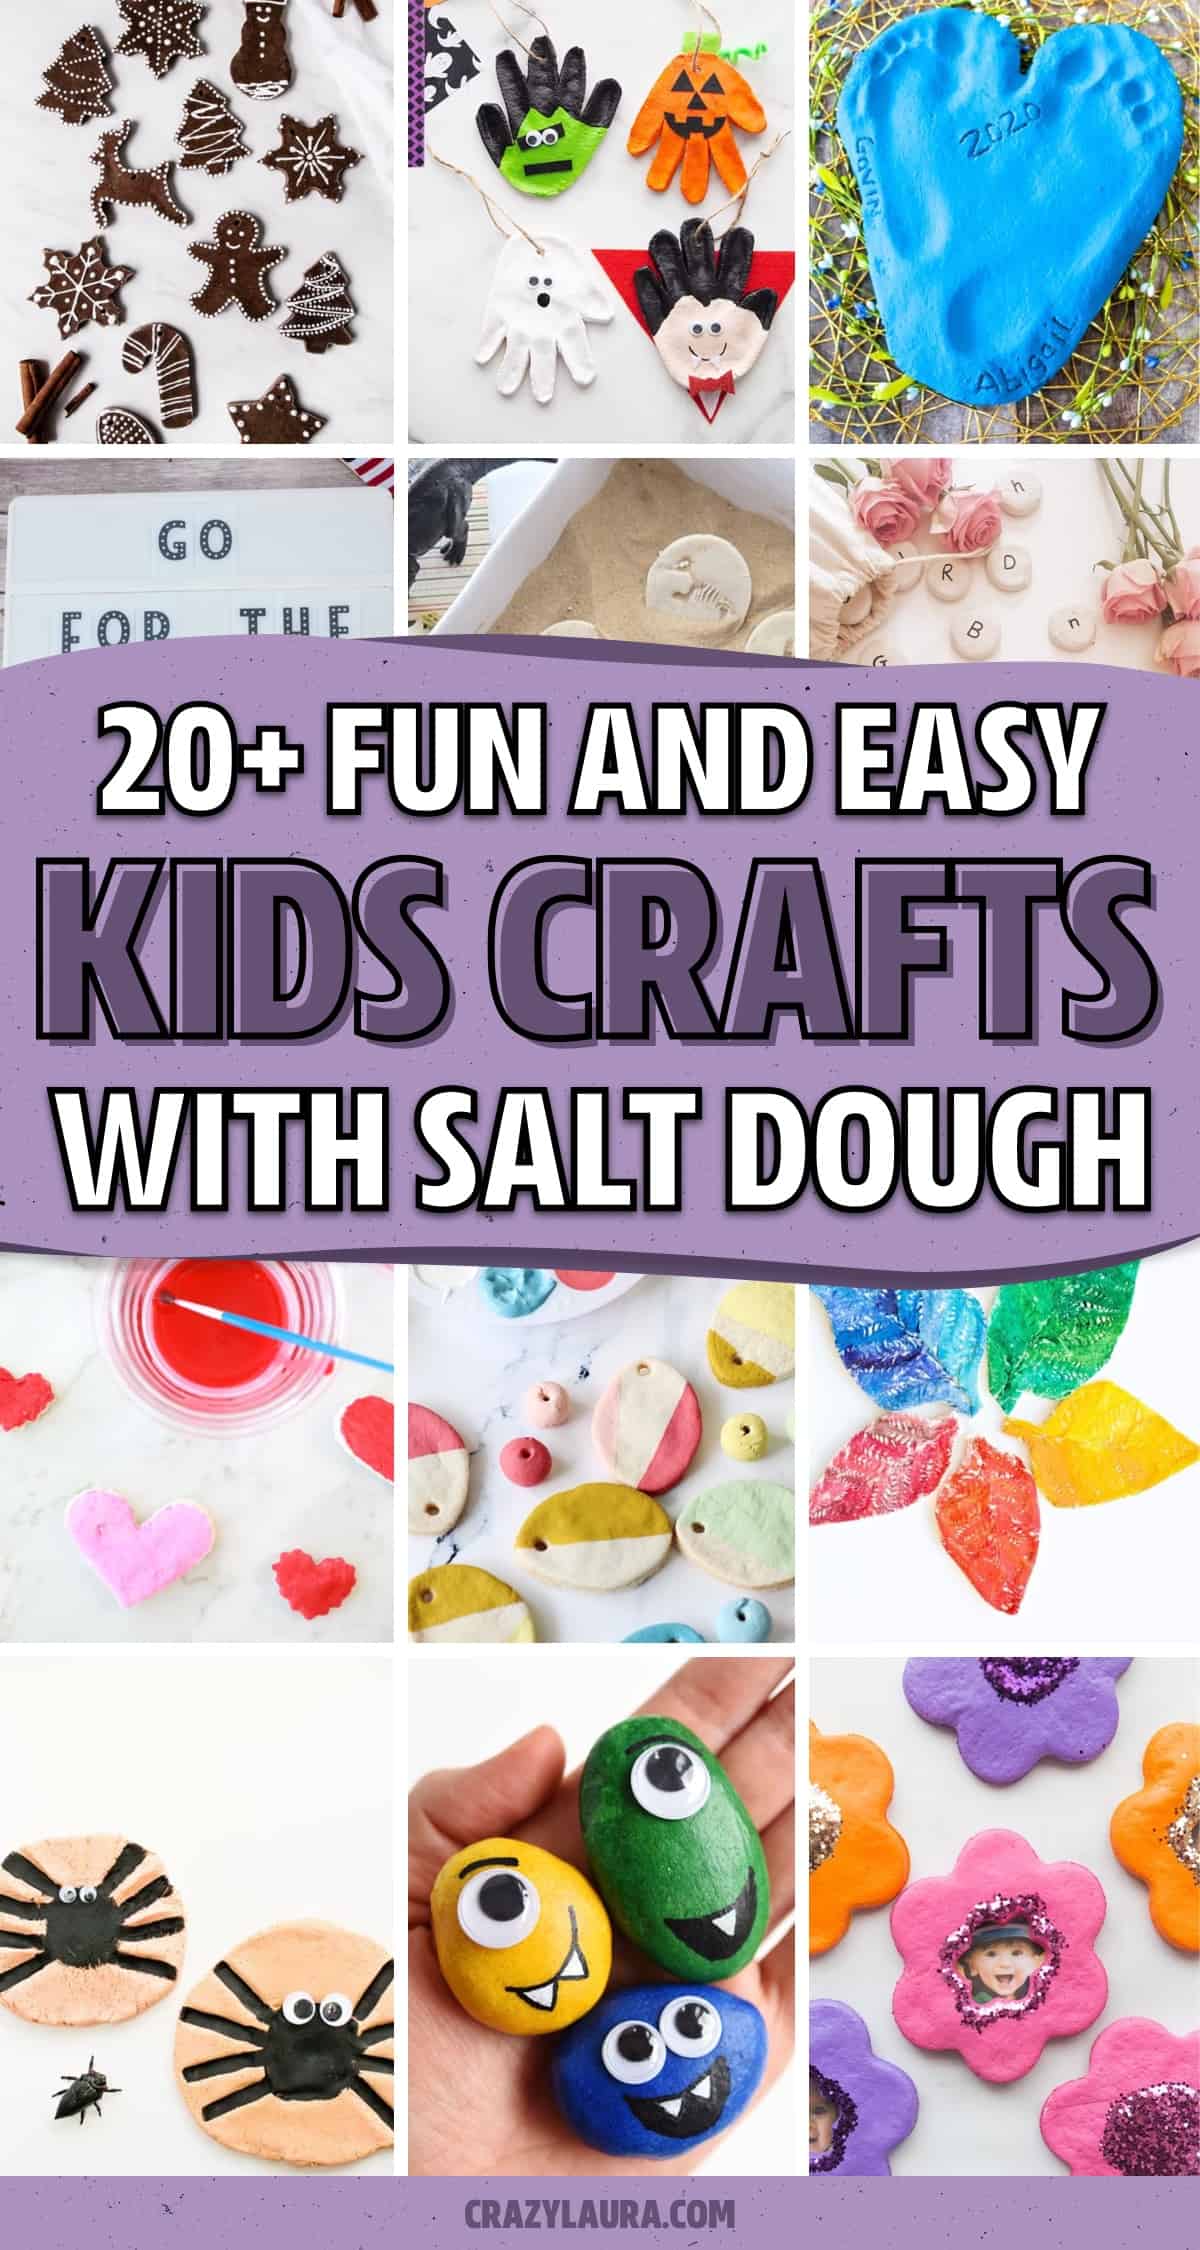 homemade dough crafts for young kids